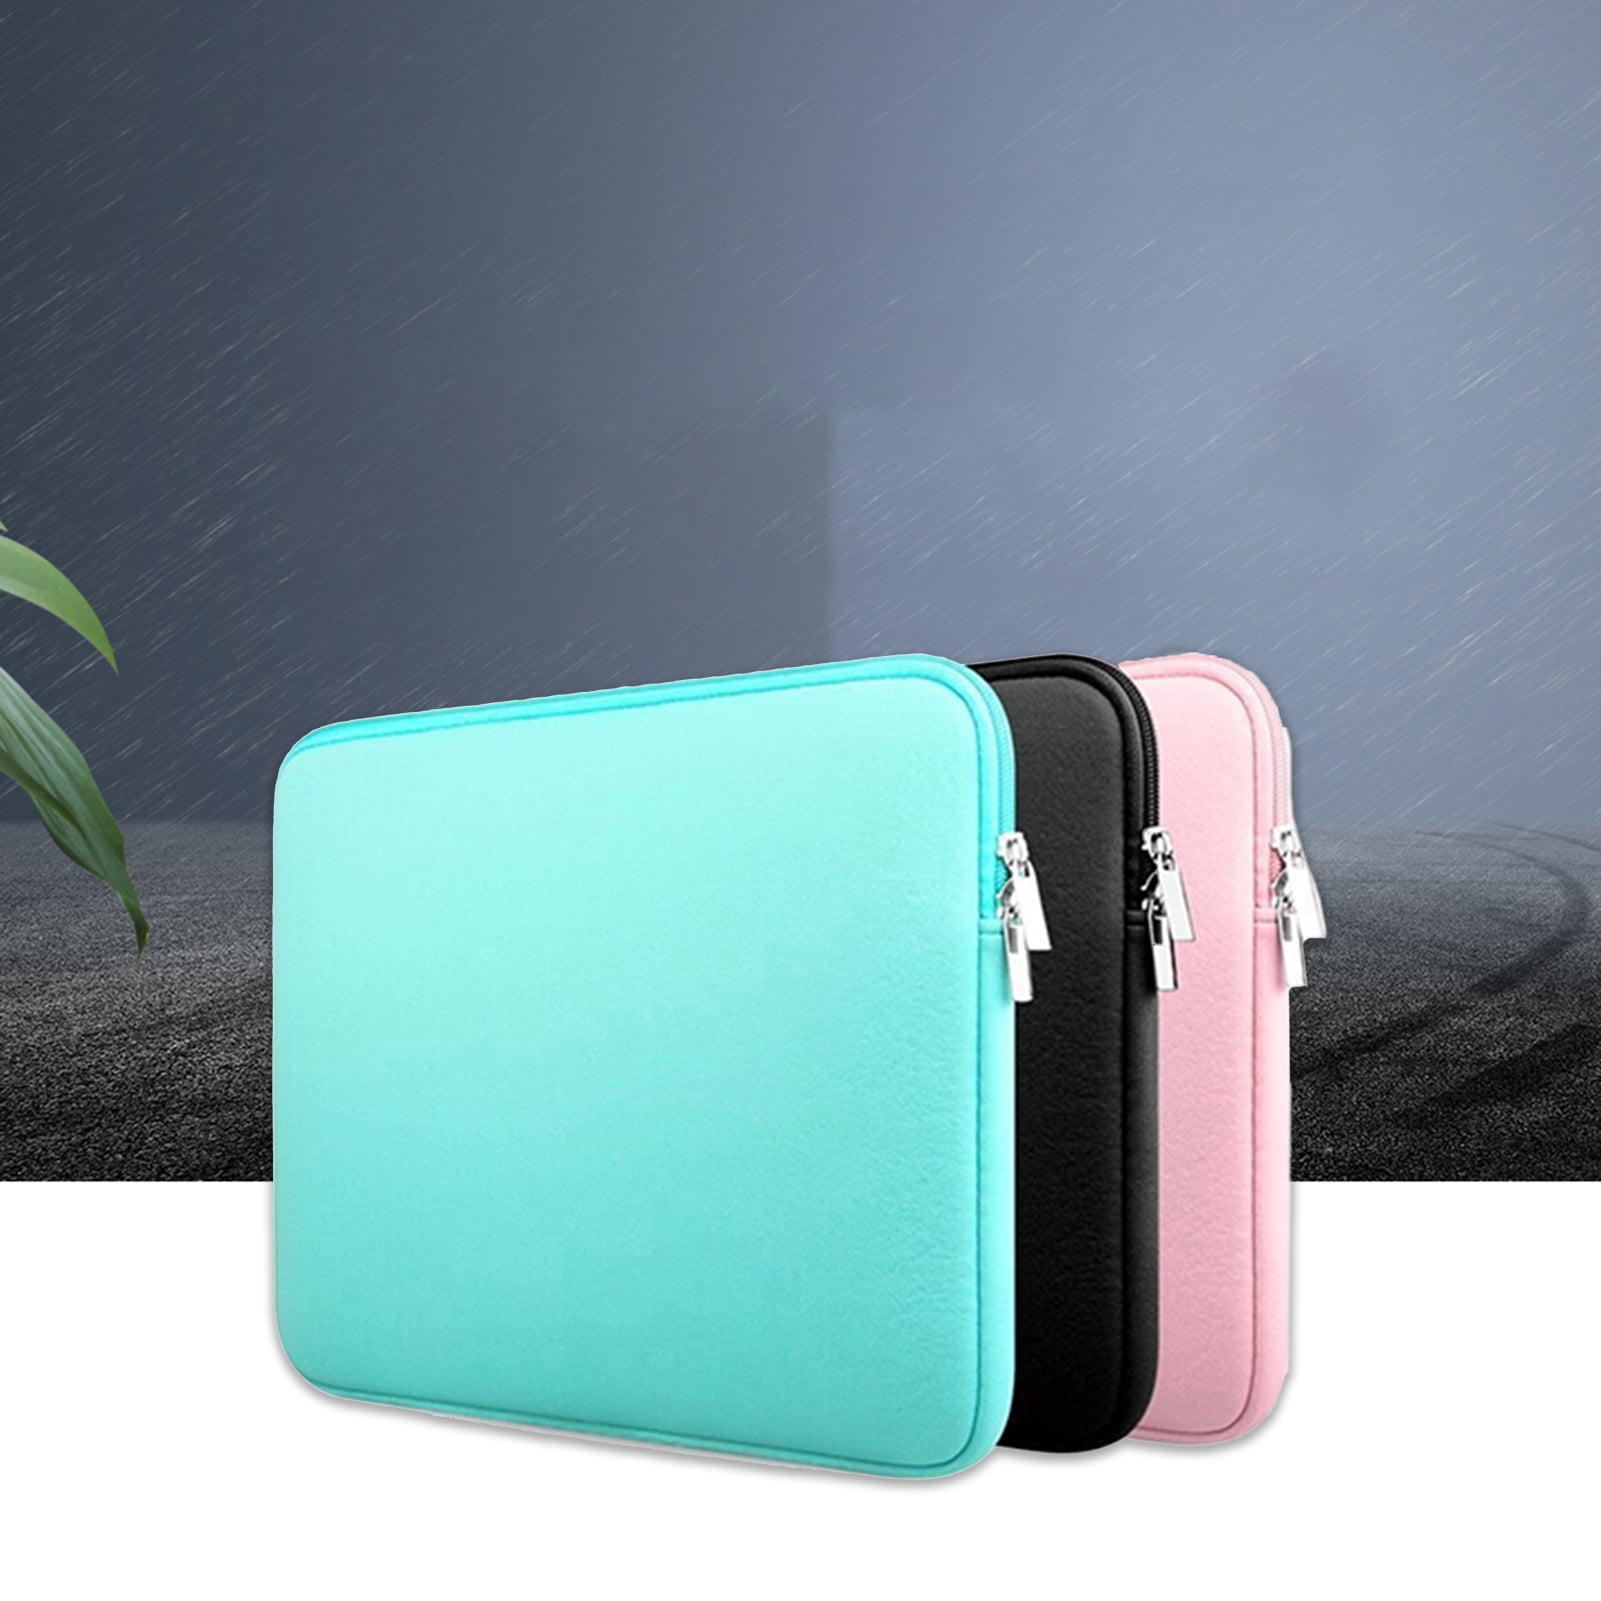 Carry Bag+Hard Case+Wireless Mouse+KB Cover for Macbook Pro/Air/Retina 11/13/15"